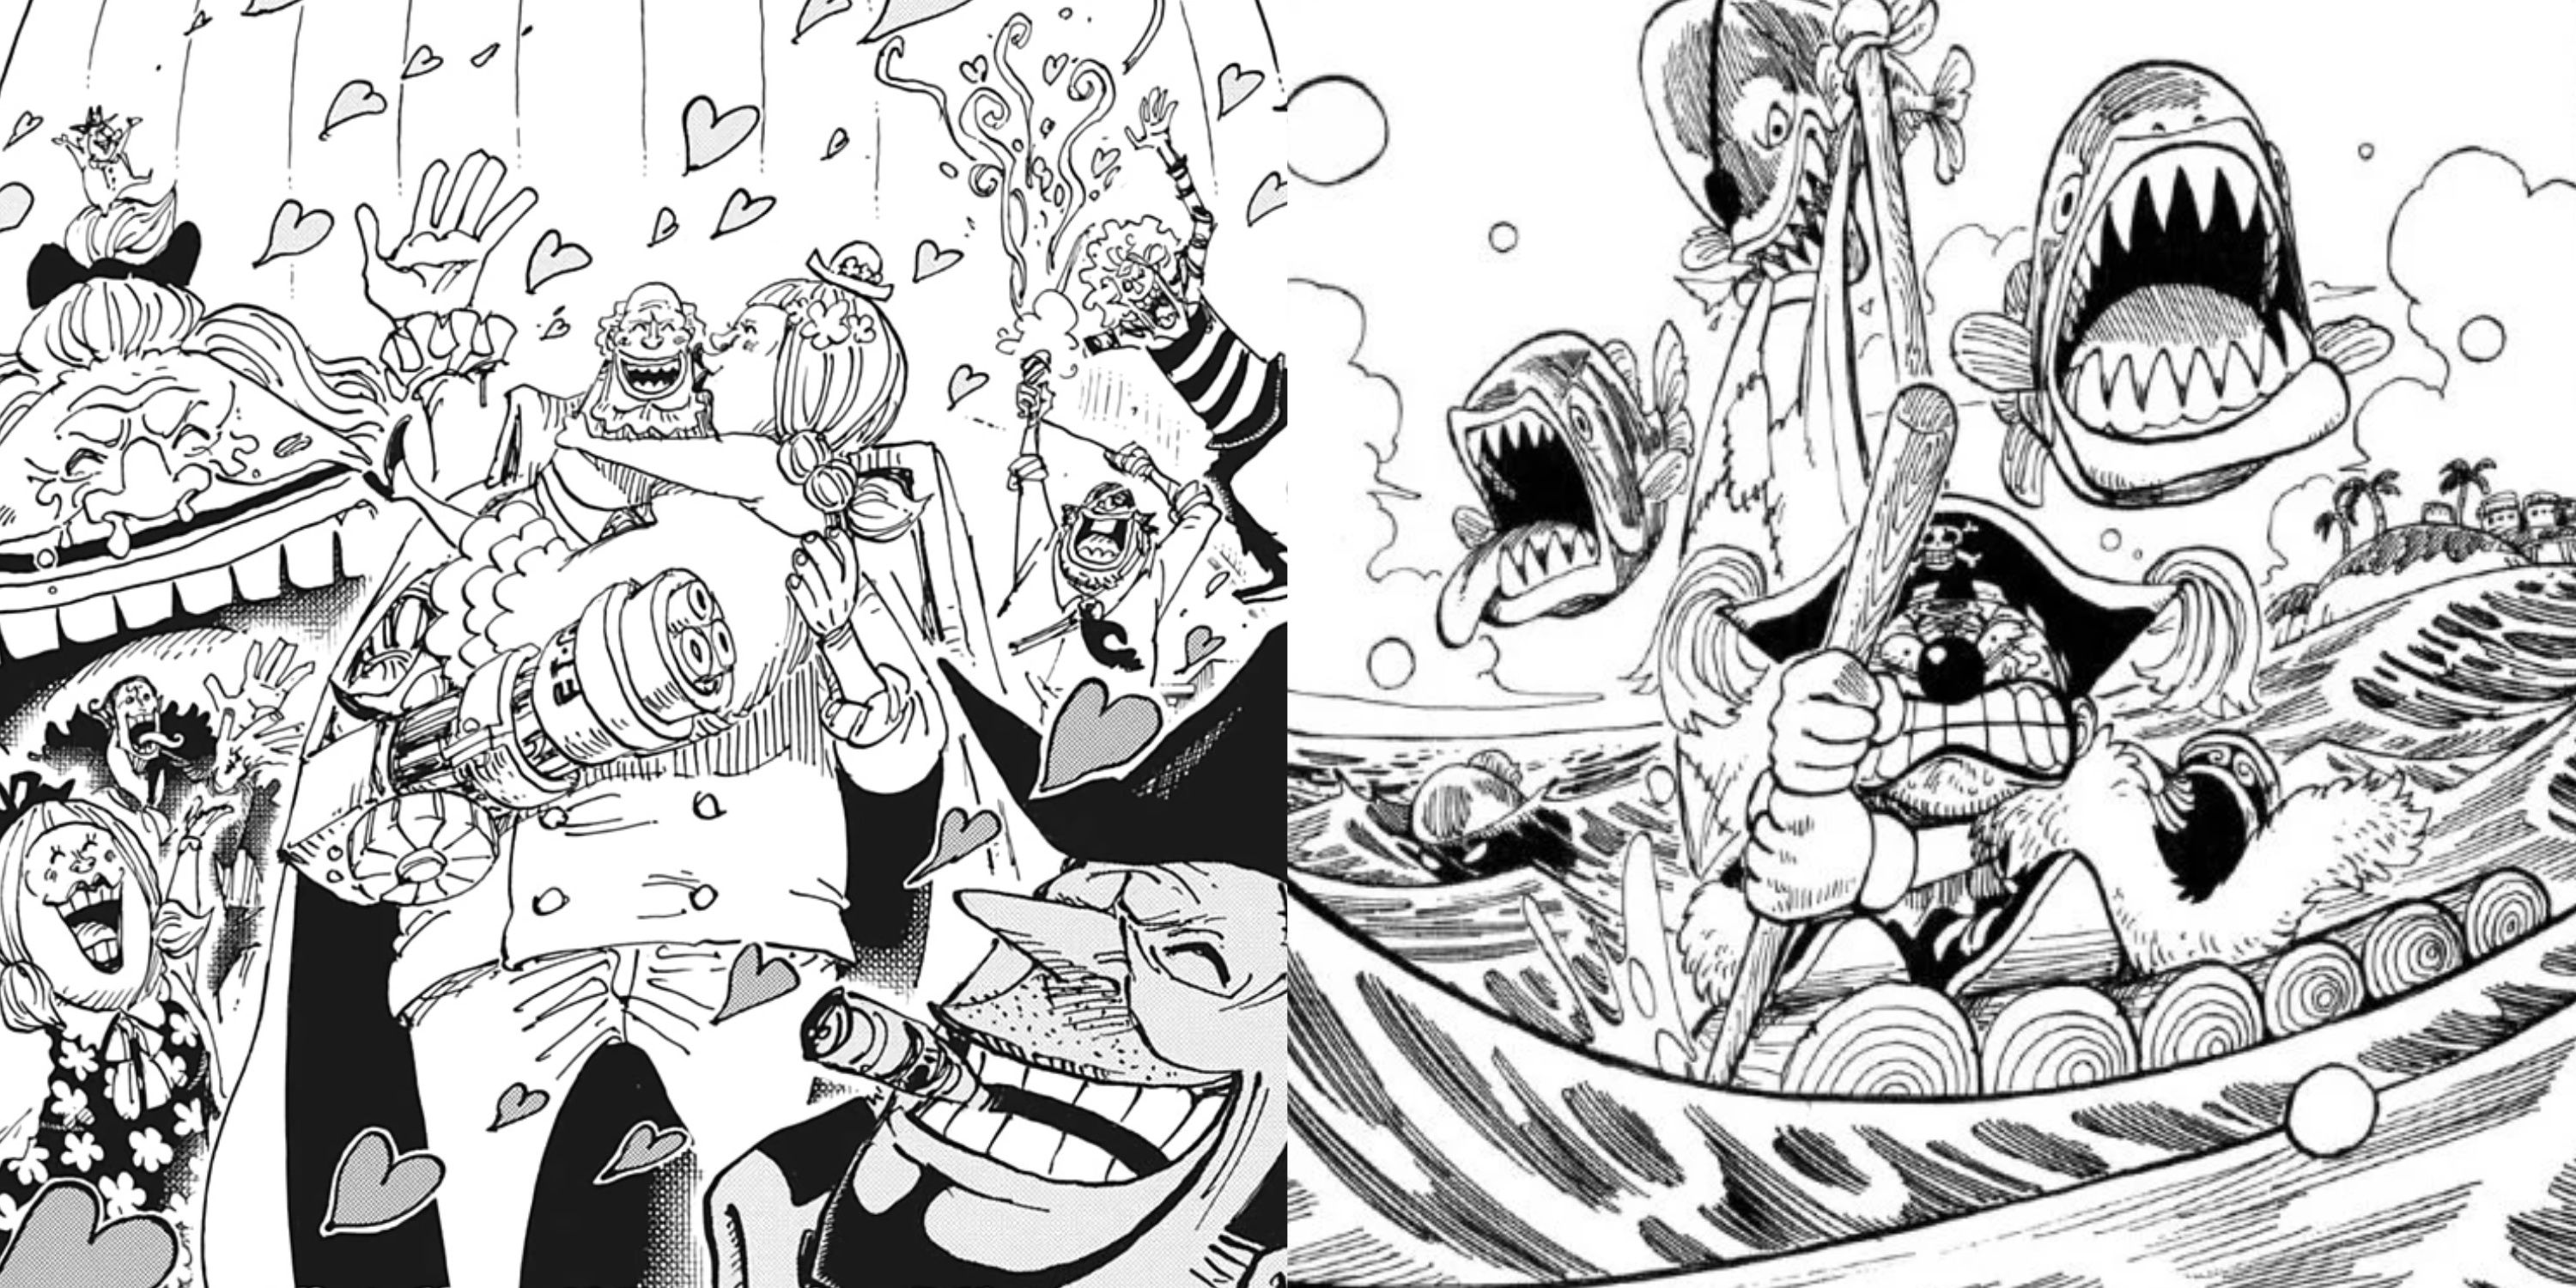 10 One Piece Cover Stories The Anime Should’ve Covered